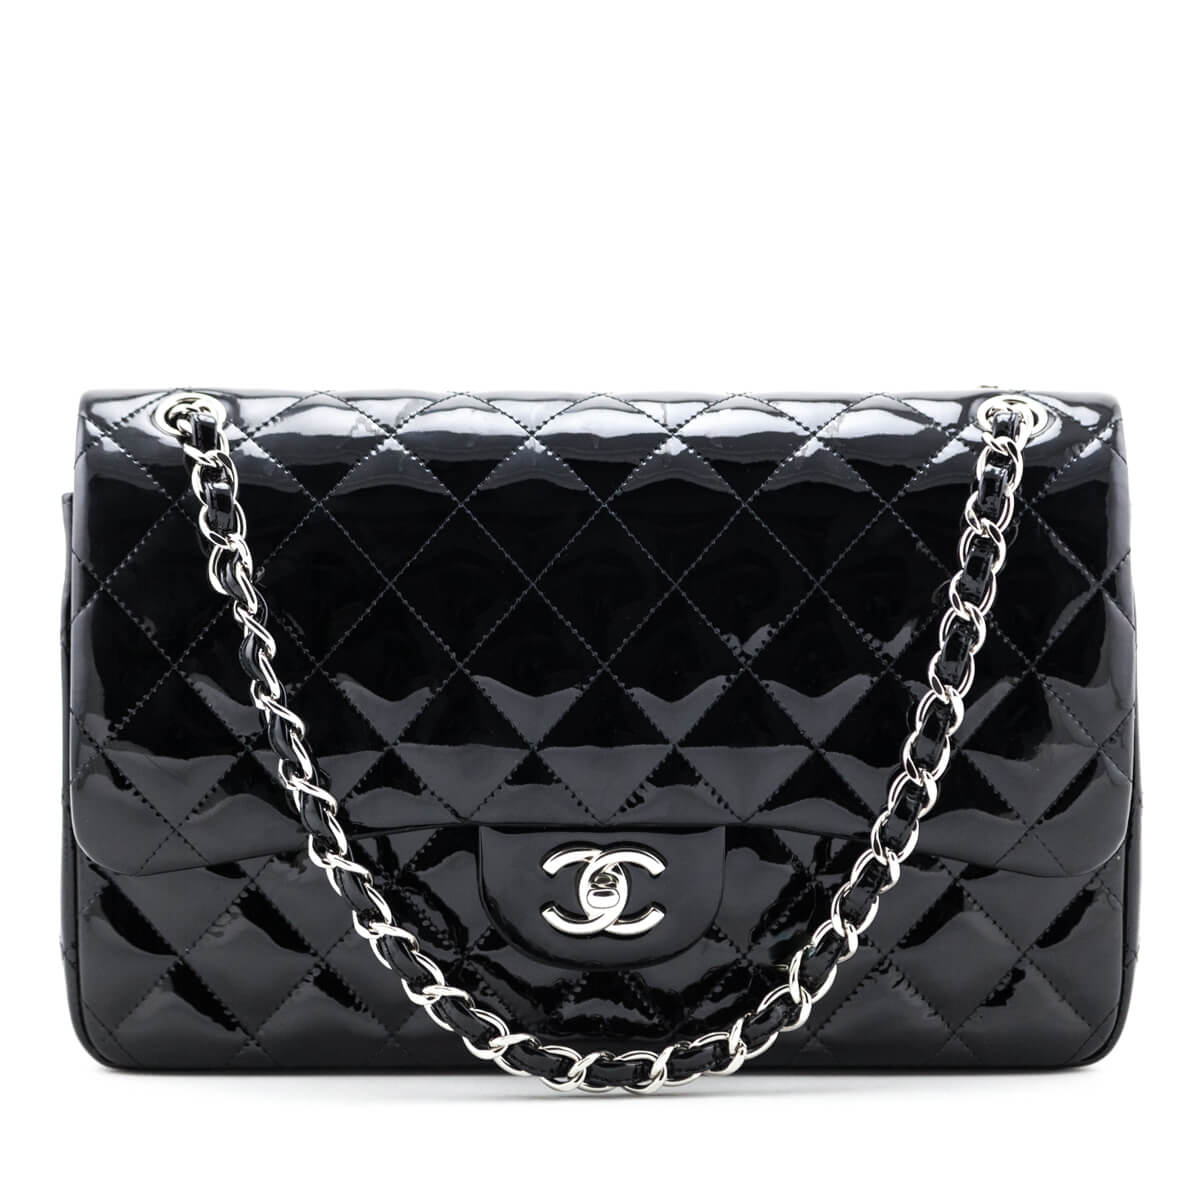 Chanel Black Quilted Patent Leather Jumbo Large Classic Double Flap Bag - Love that Bag etc - Preowned Authentic Designer Handbags & Preloved Fashions